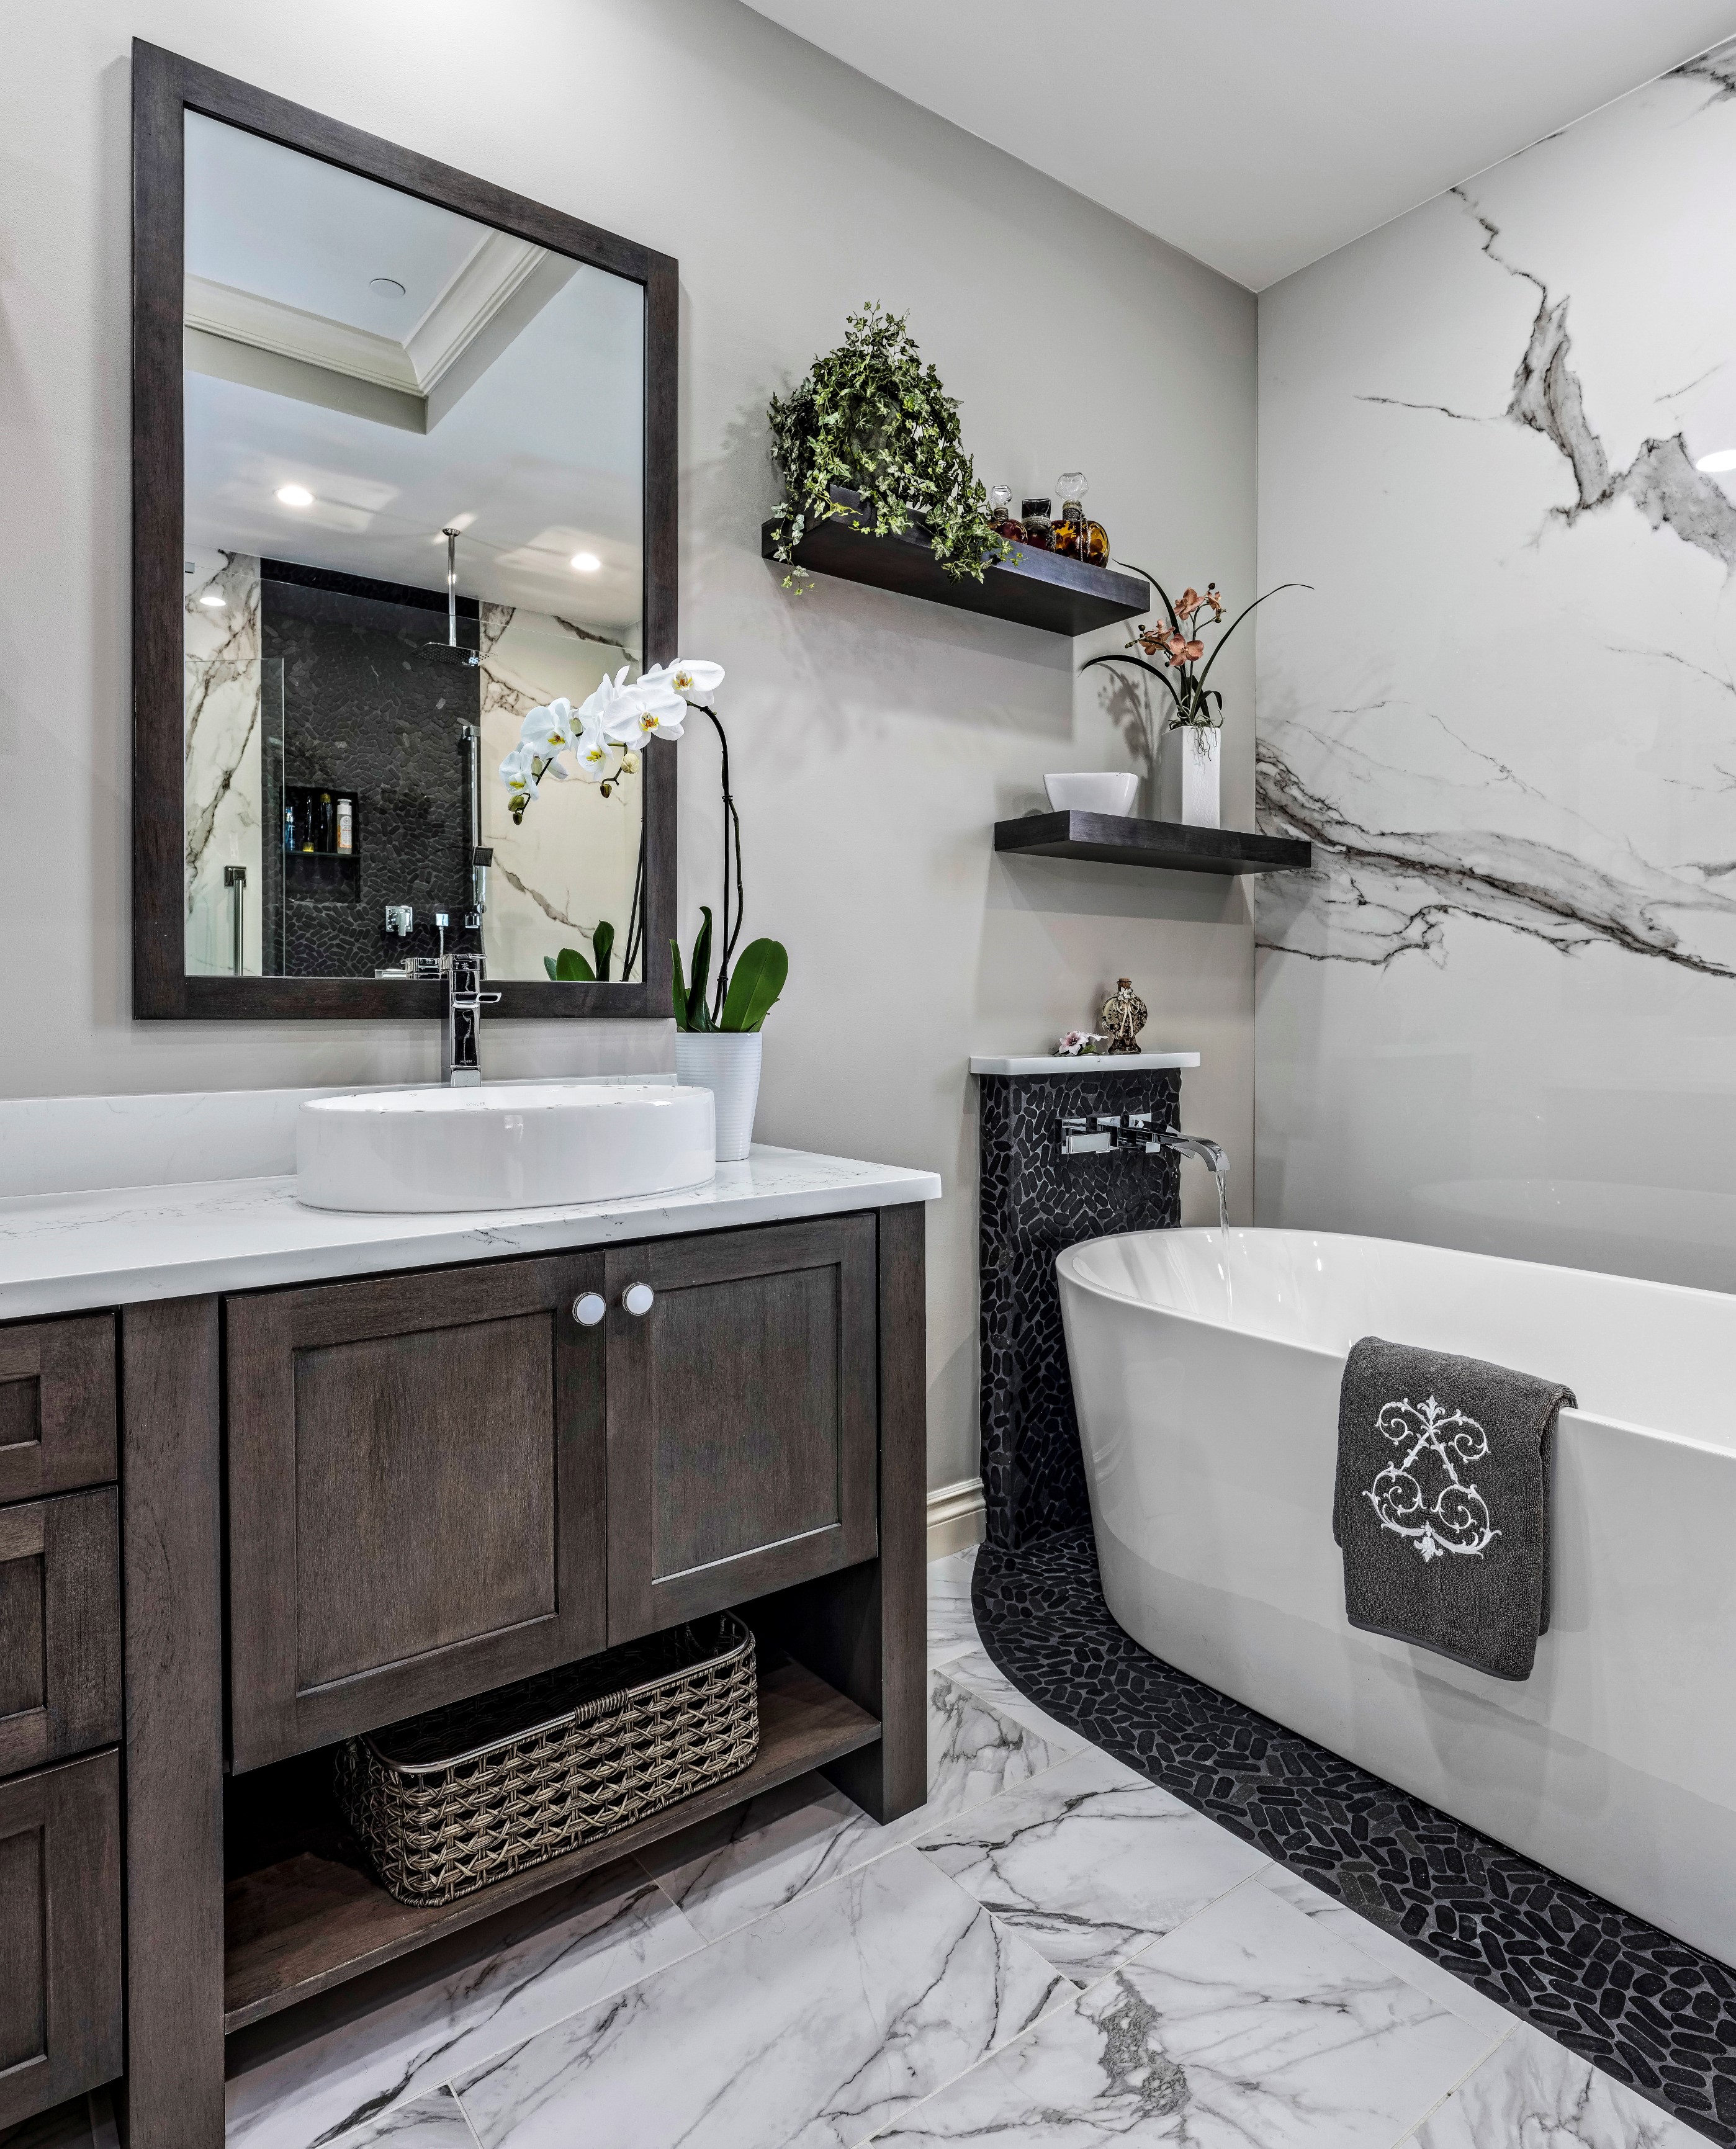 Bathroom Remodeling Typically Cost, Cost Of Renovating Small Bathroom